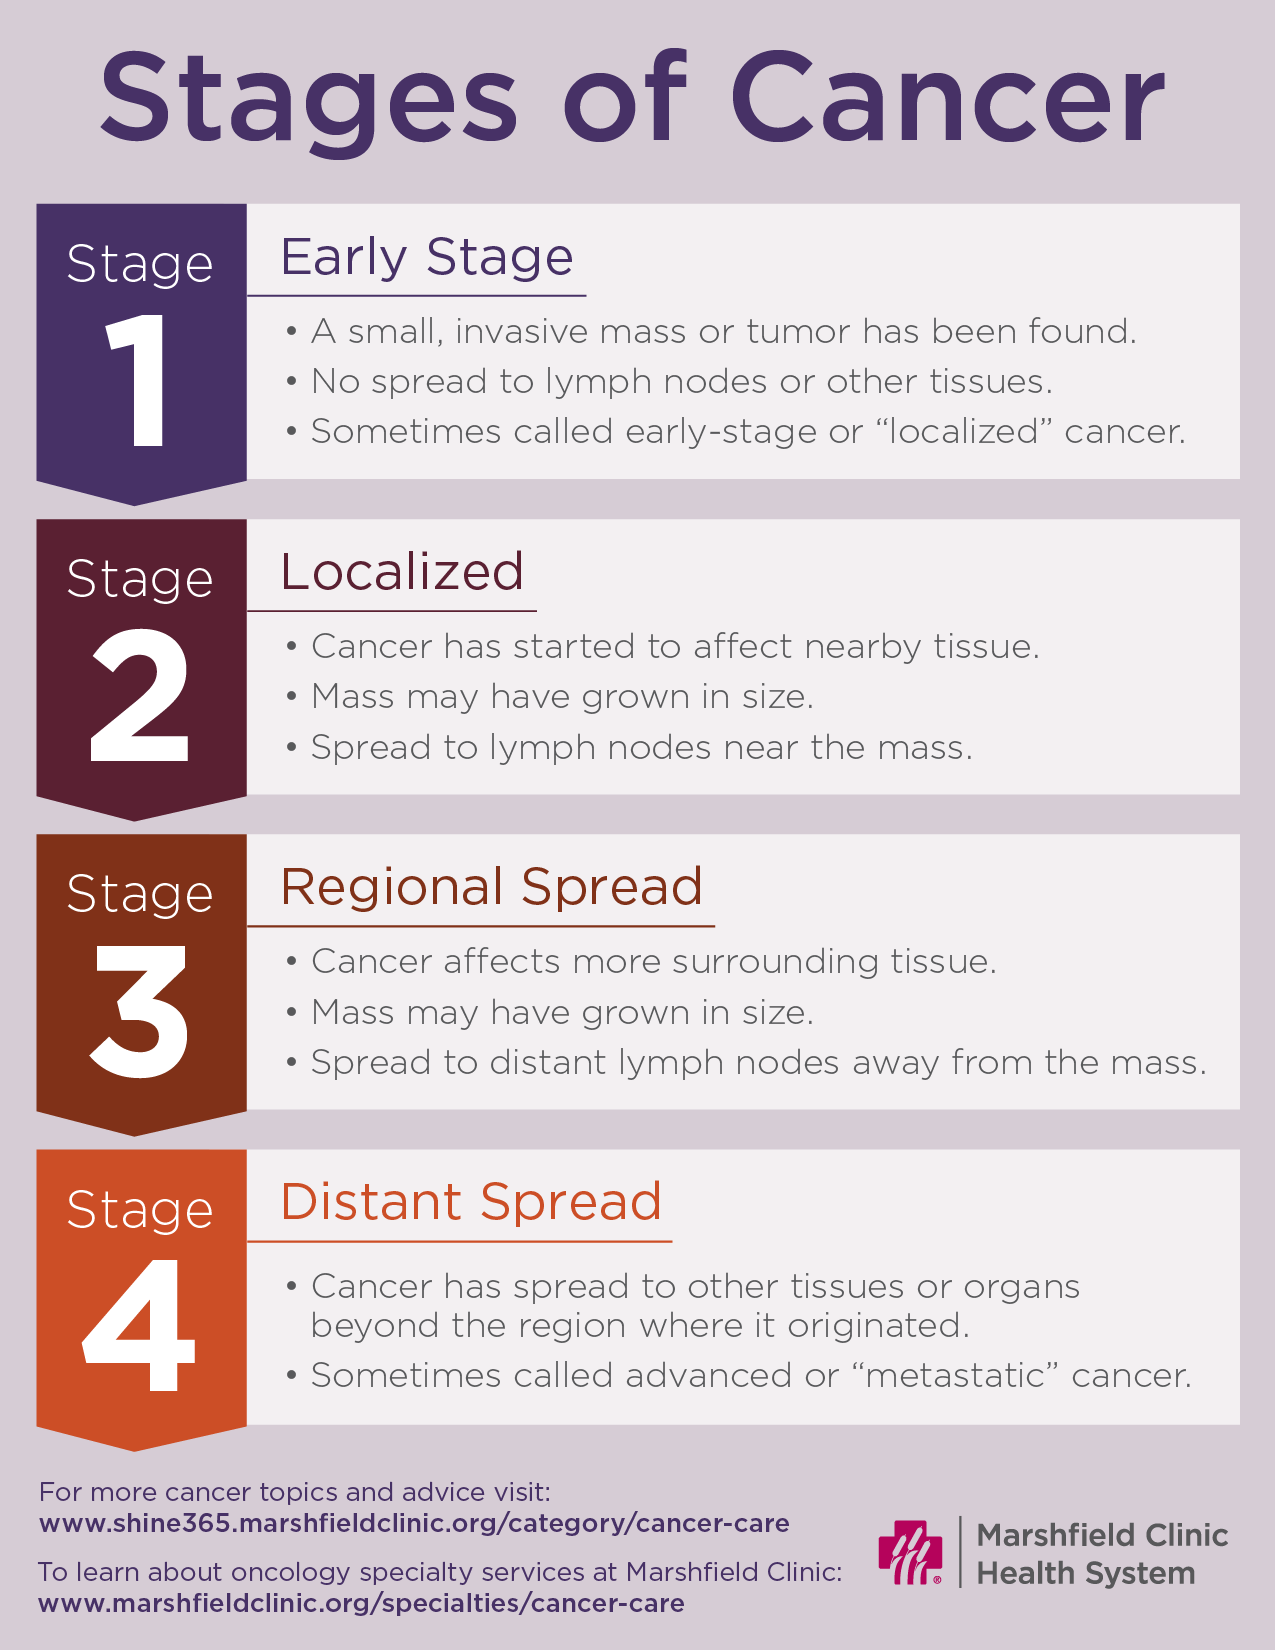 What Do The Stages Of Cancer Mean